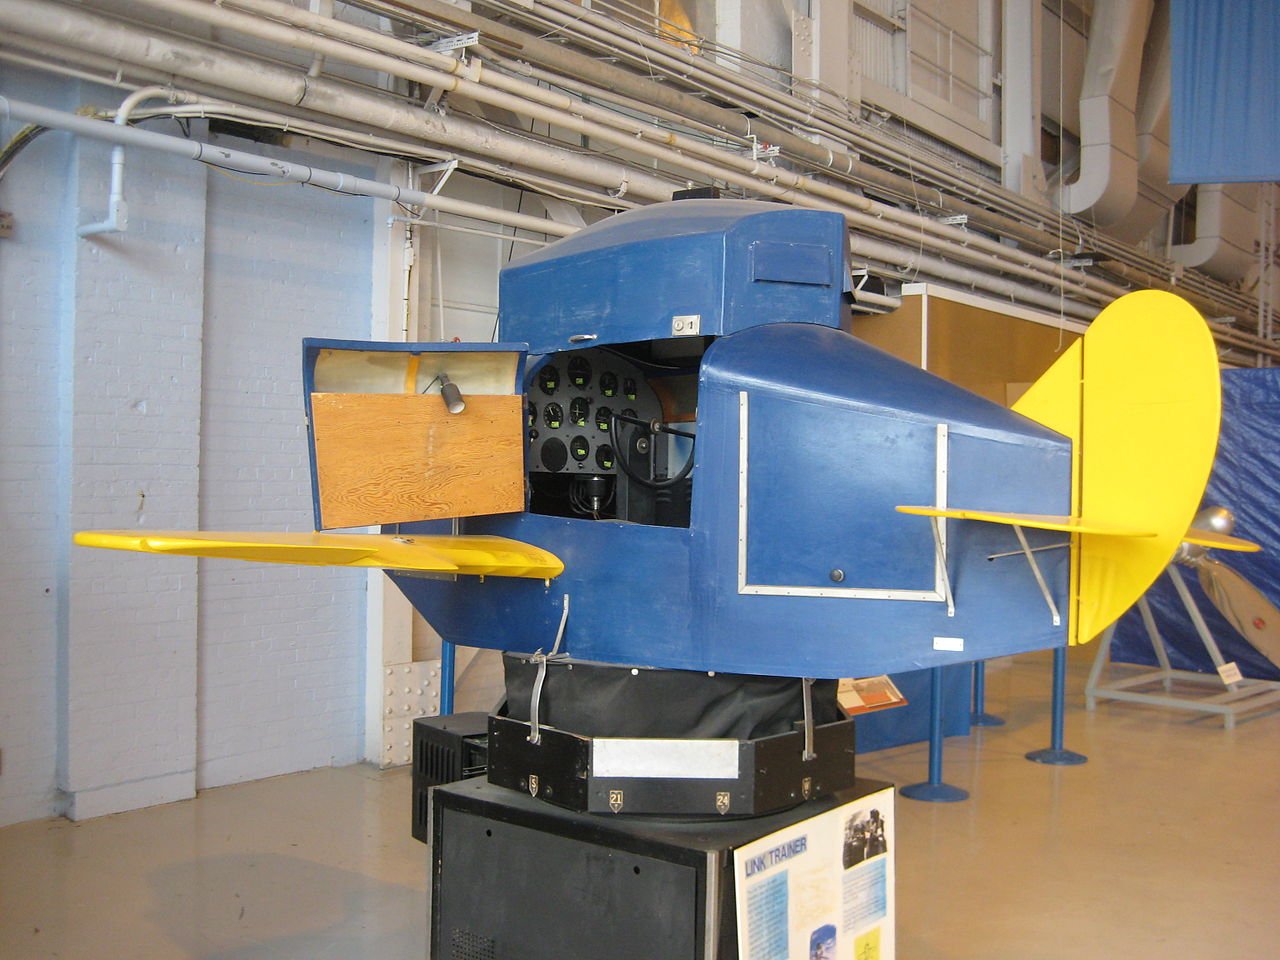 Link Trainer   Wikipedia